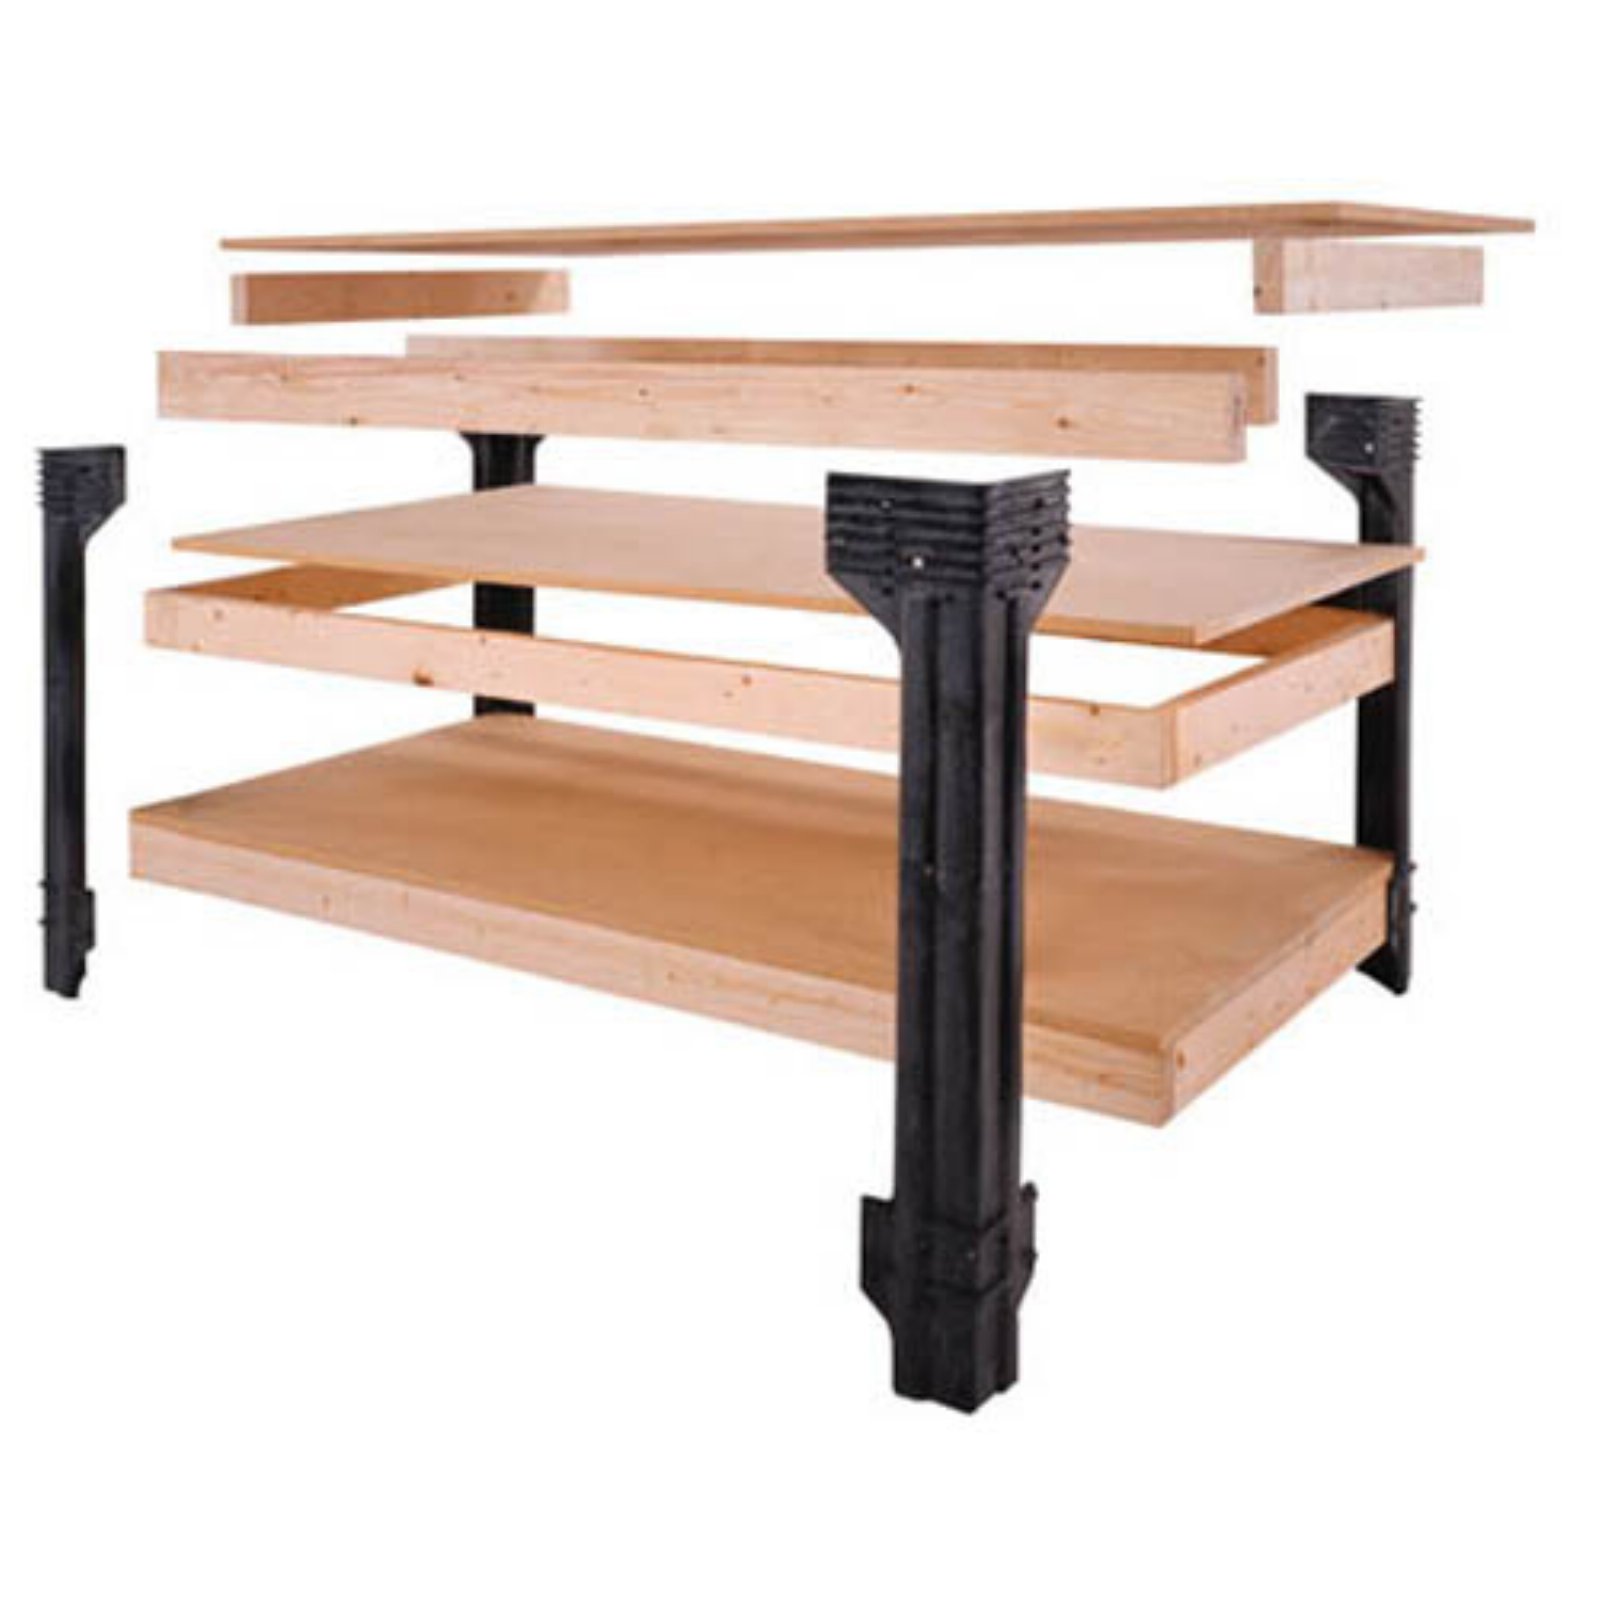 Hopkins 2x4 Basics Work Bench Legs, Wood,Made of Durable, Maintenance-Free Structural Resin - image 1 of 9